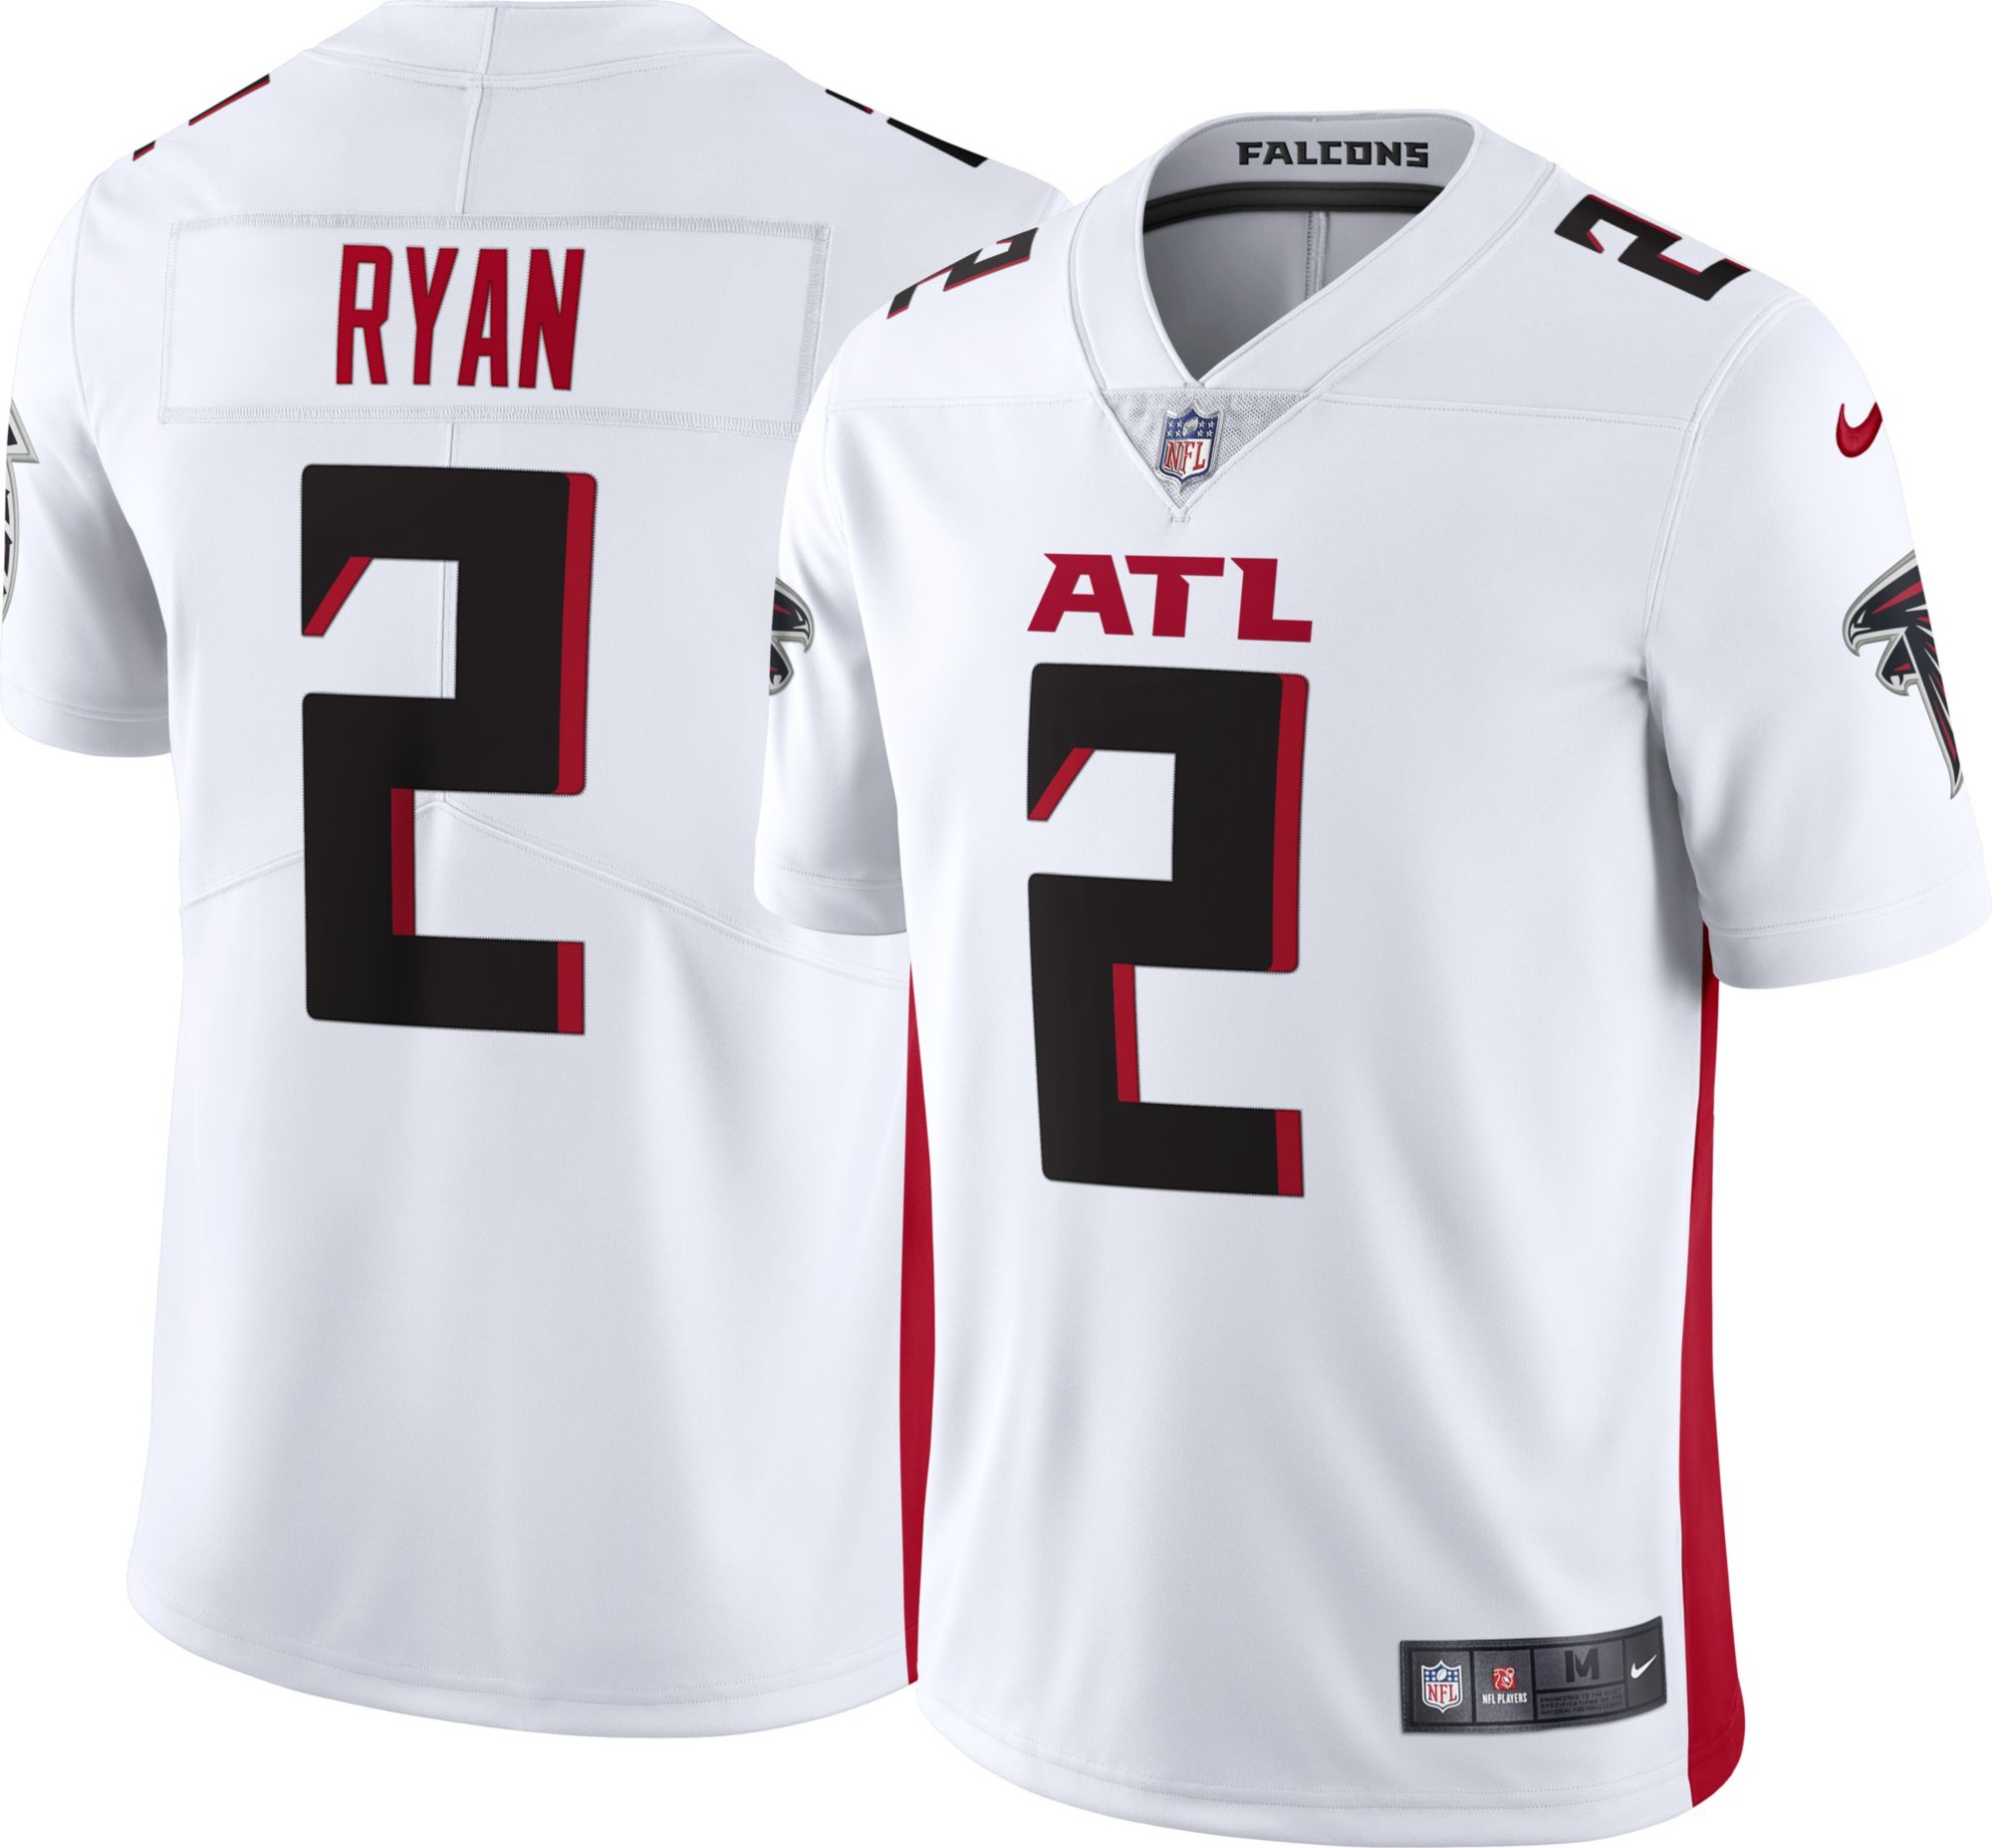 falcons new jerseys for sale